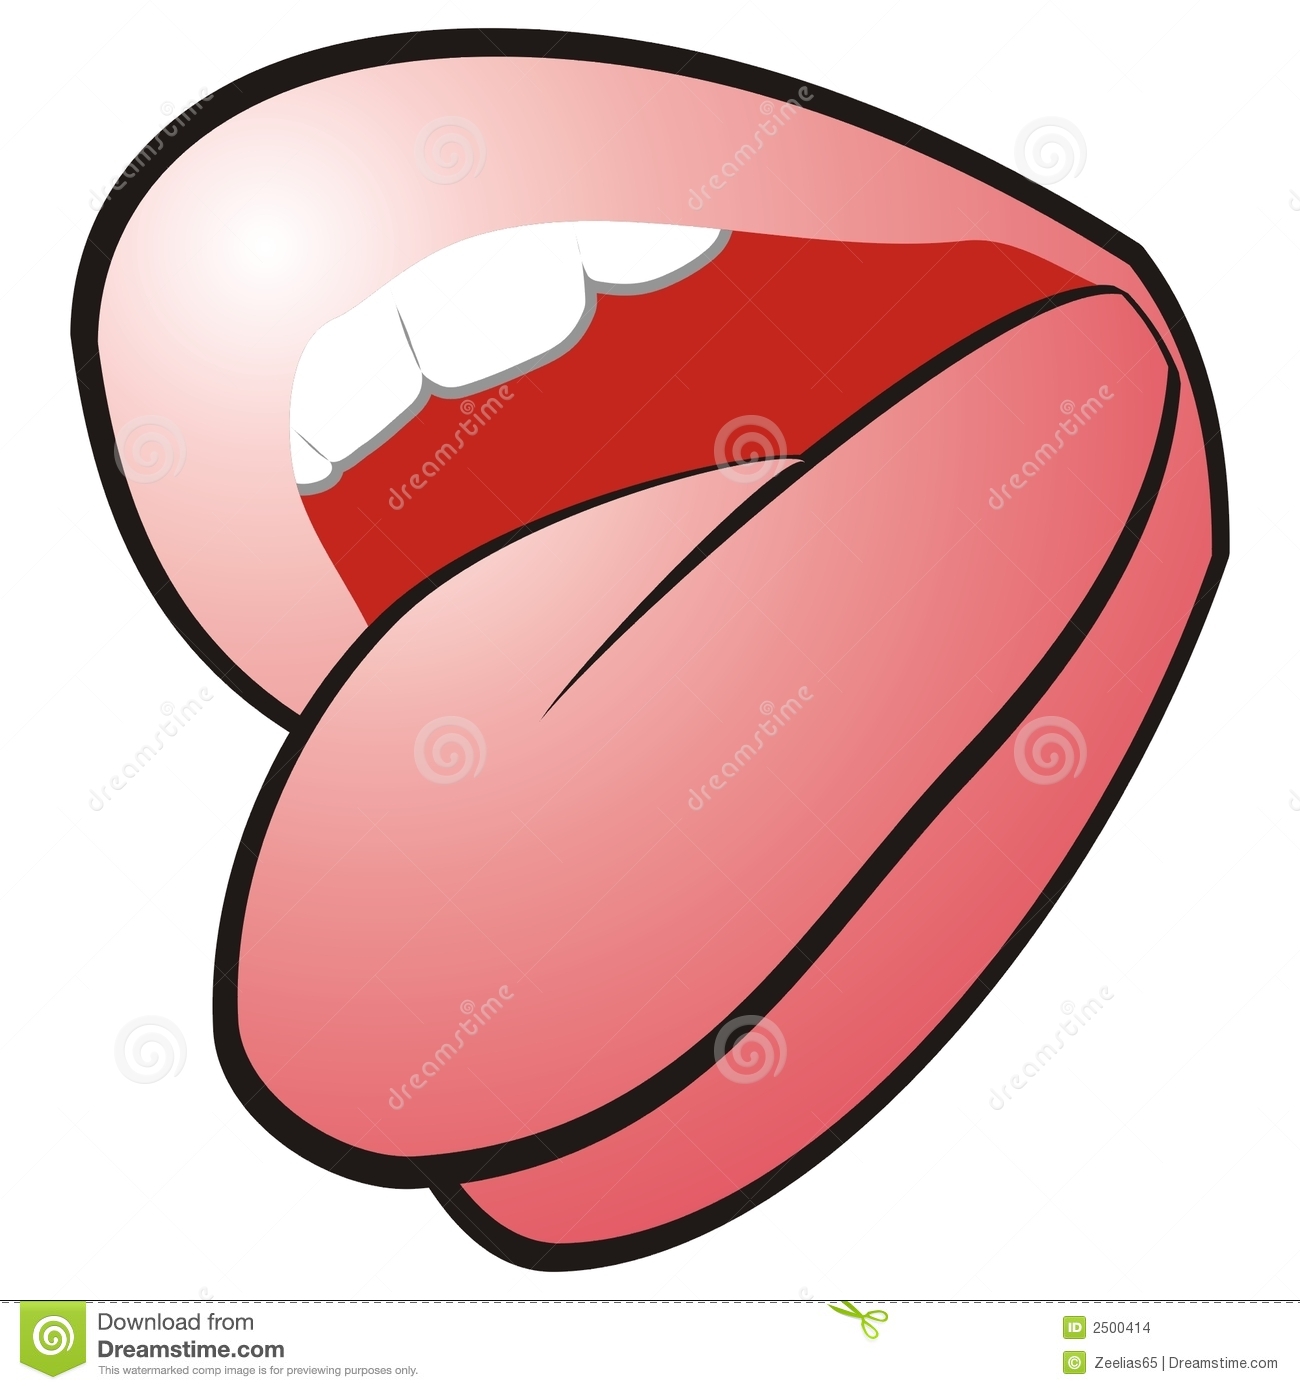 Animated Tongue Out Clipart   Cliparthut   Free Clipart